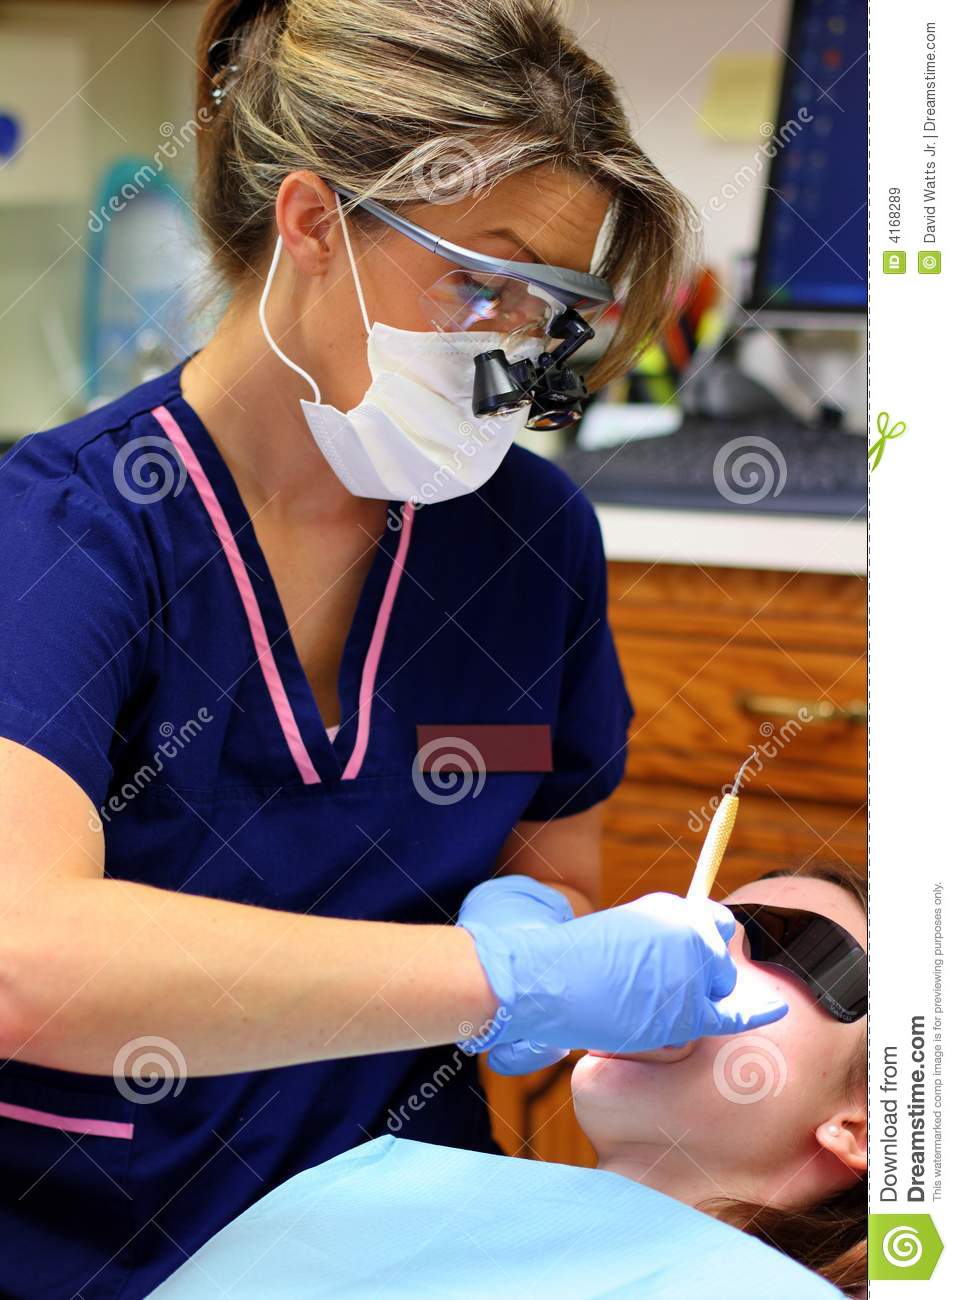 This Dental Hygienist Is Performing A Routine Cleaning On A Child